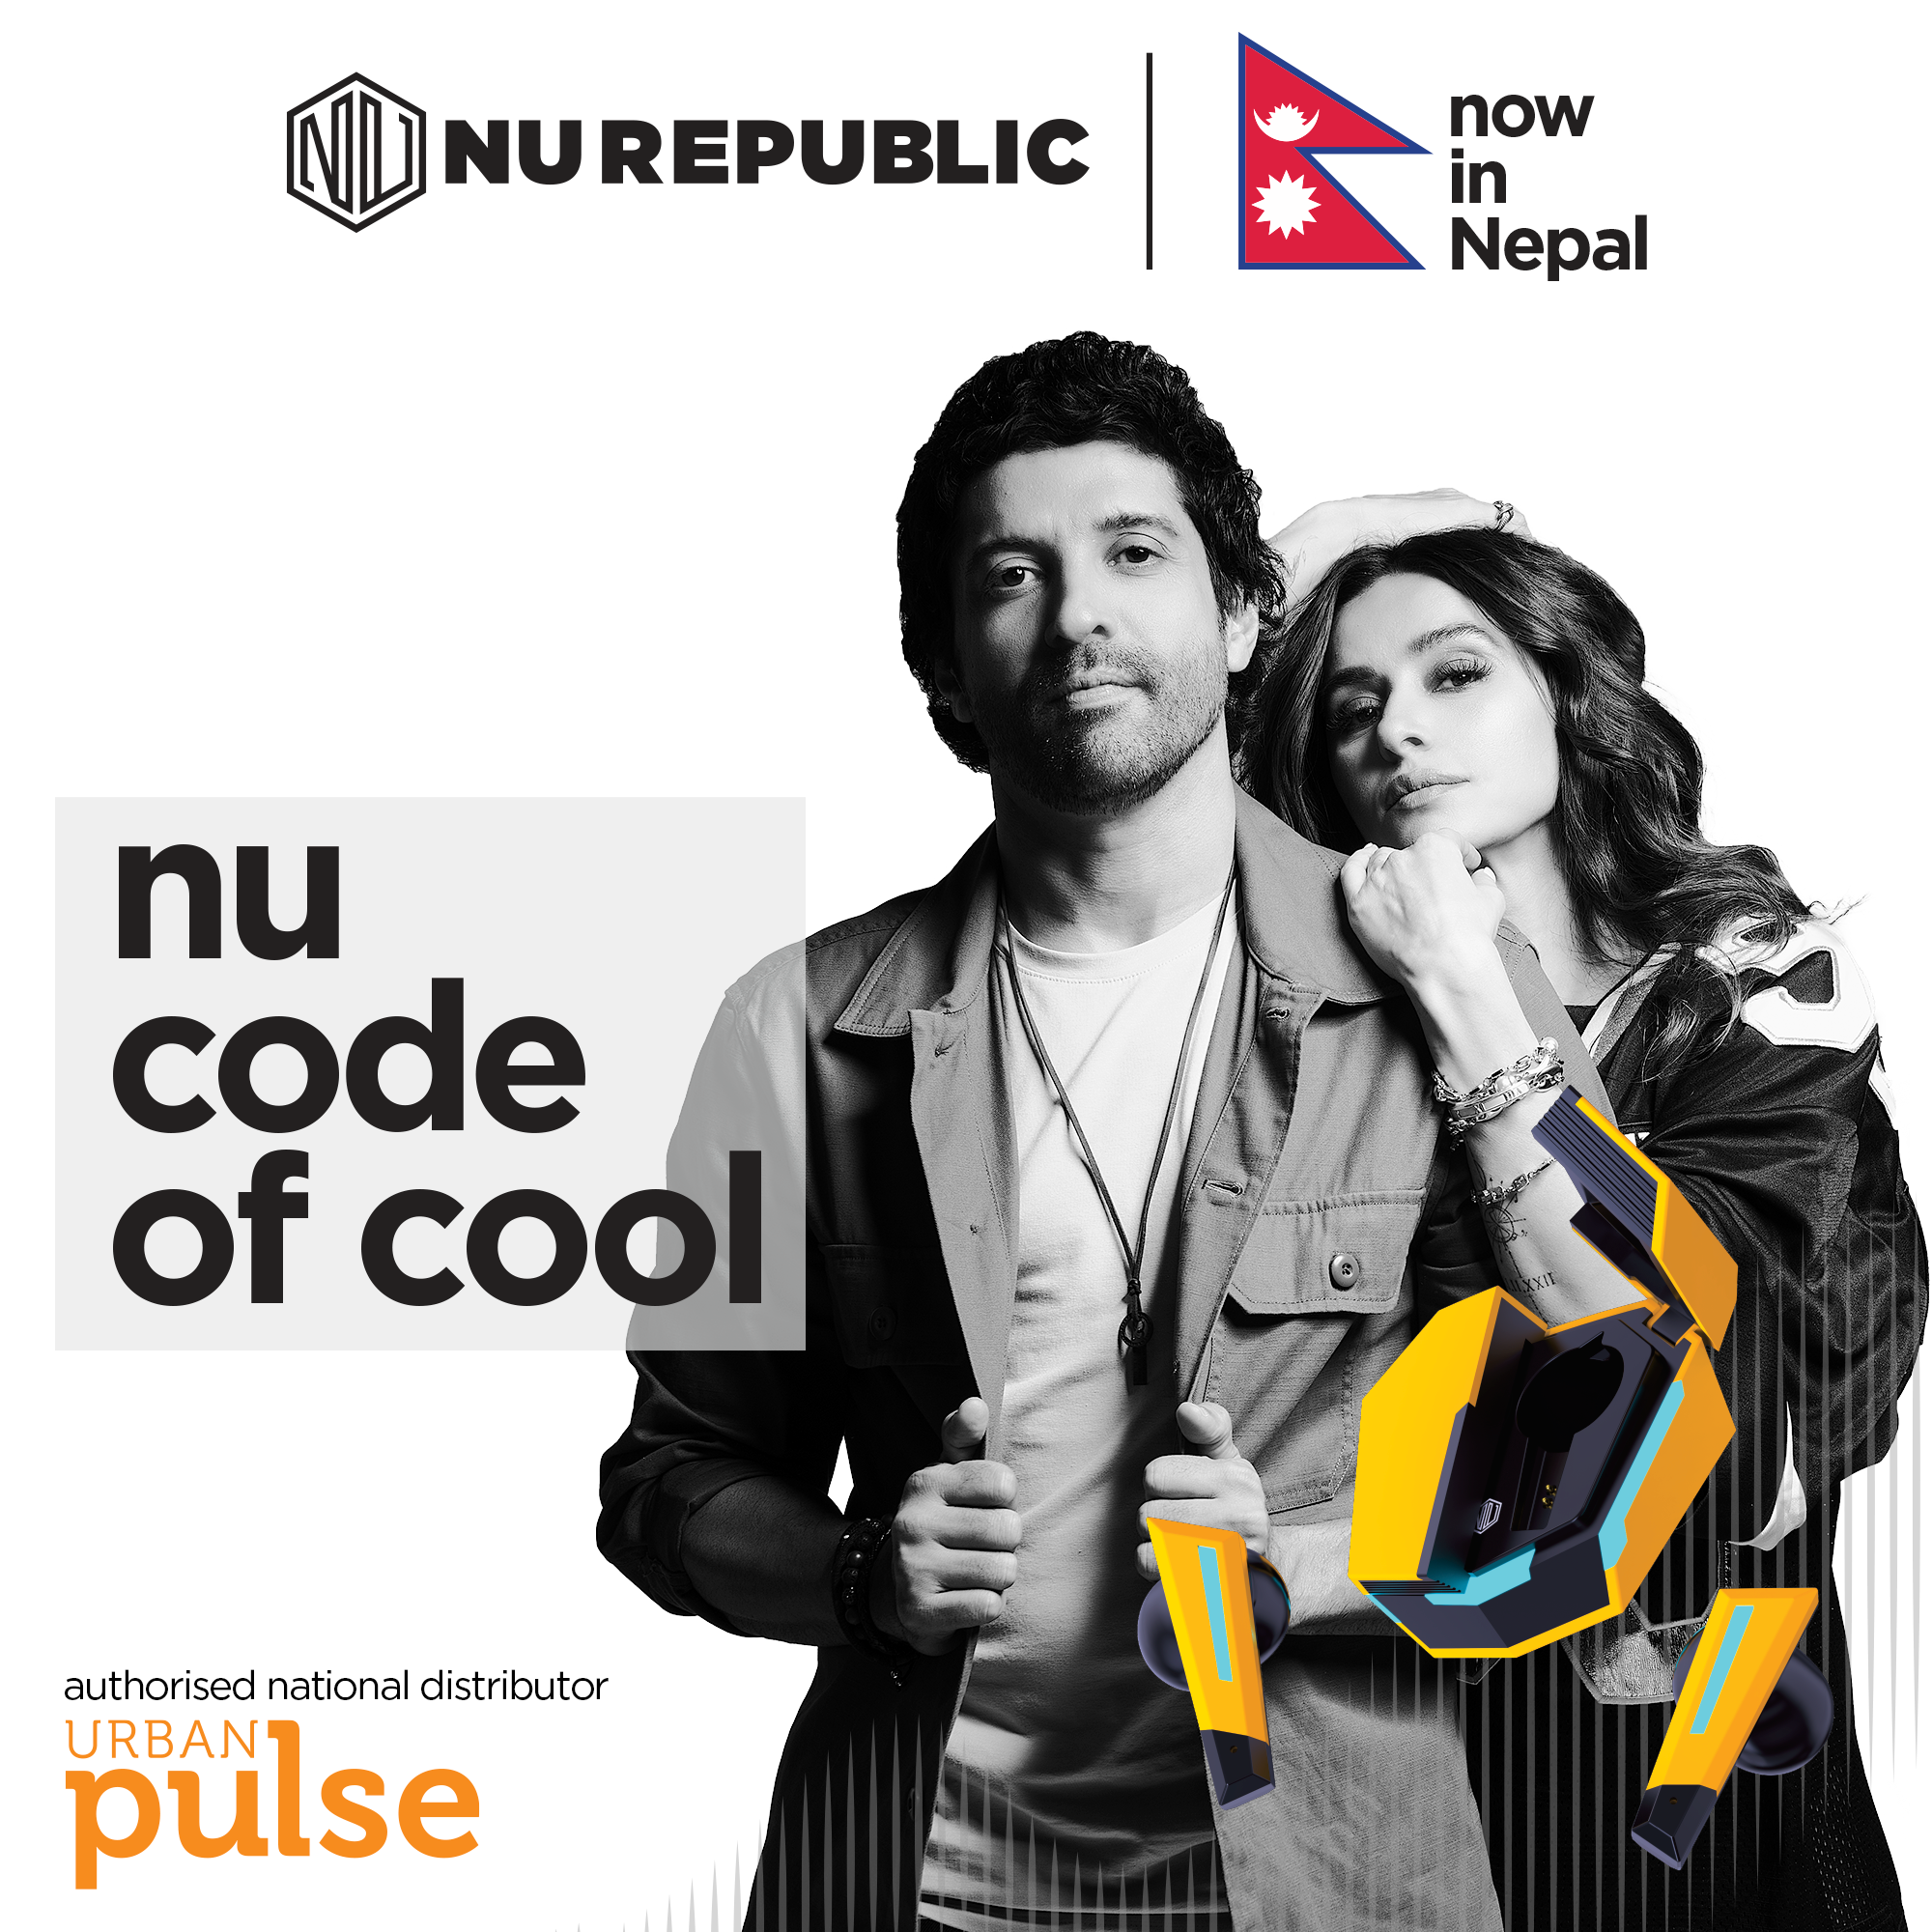 Nu Republic® the trailblazing Indian weartech brand launches in Nepal